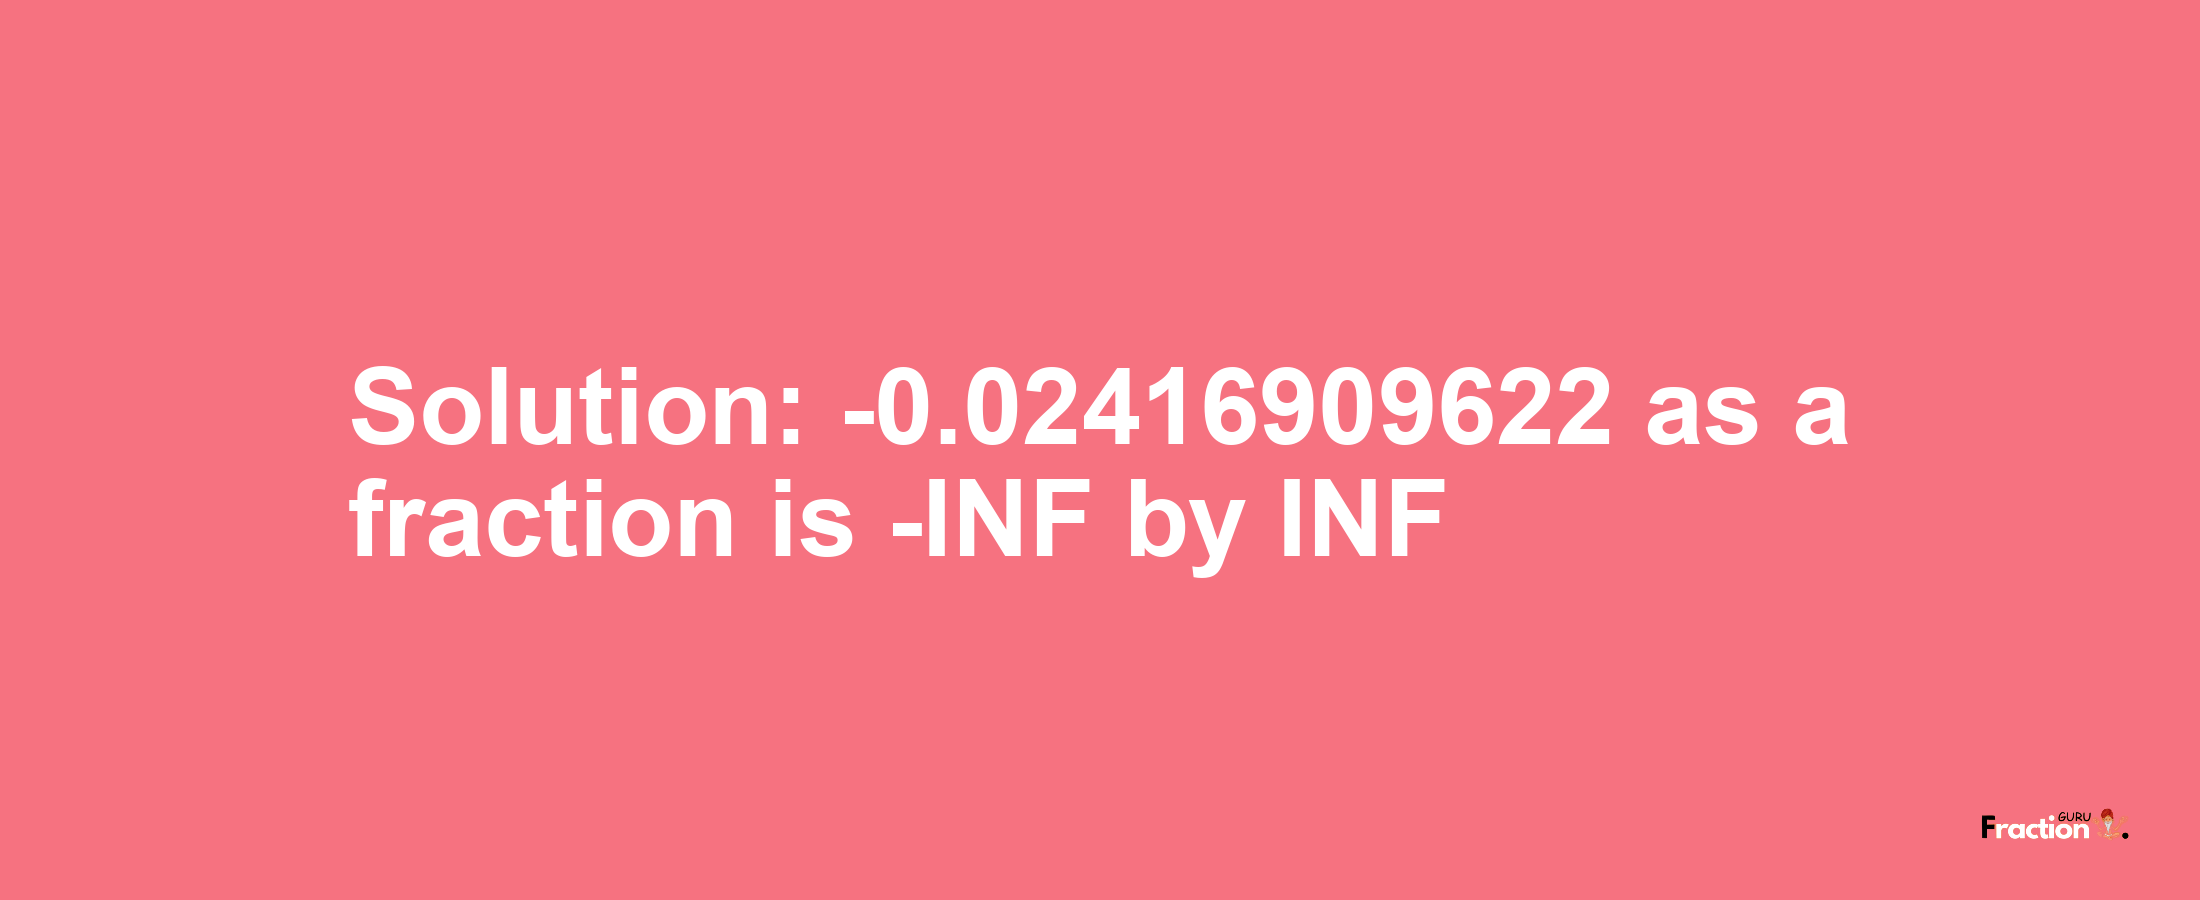 Solution:-0.02416909622 as a fraction is -INF/INF